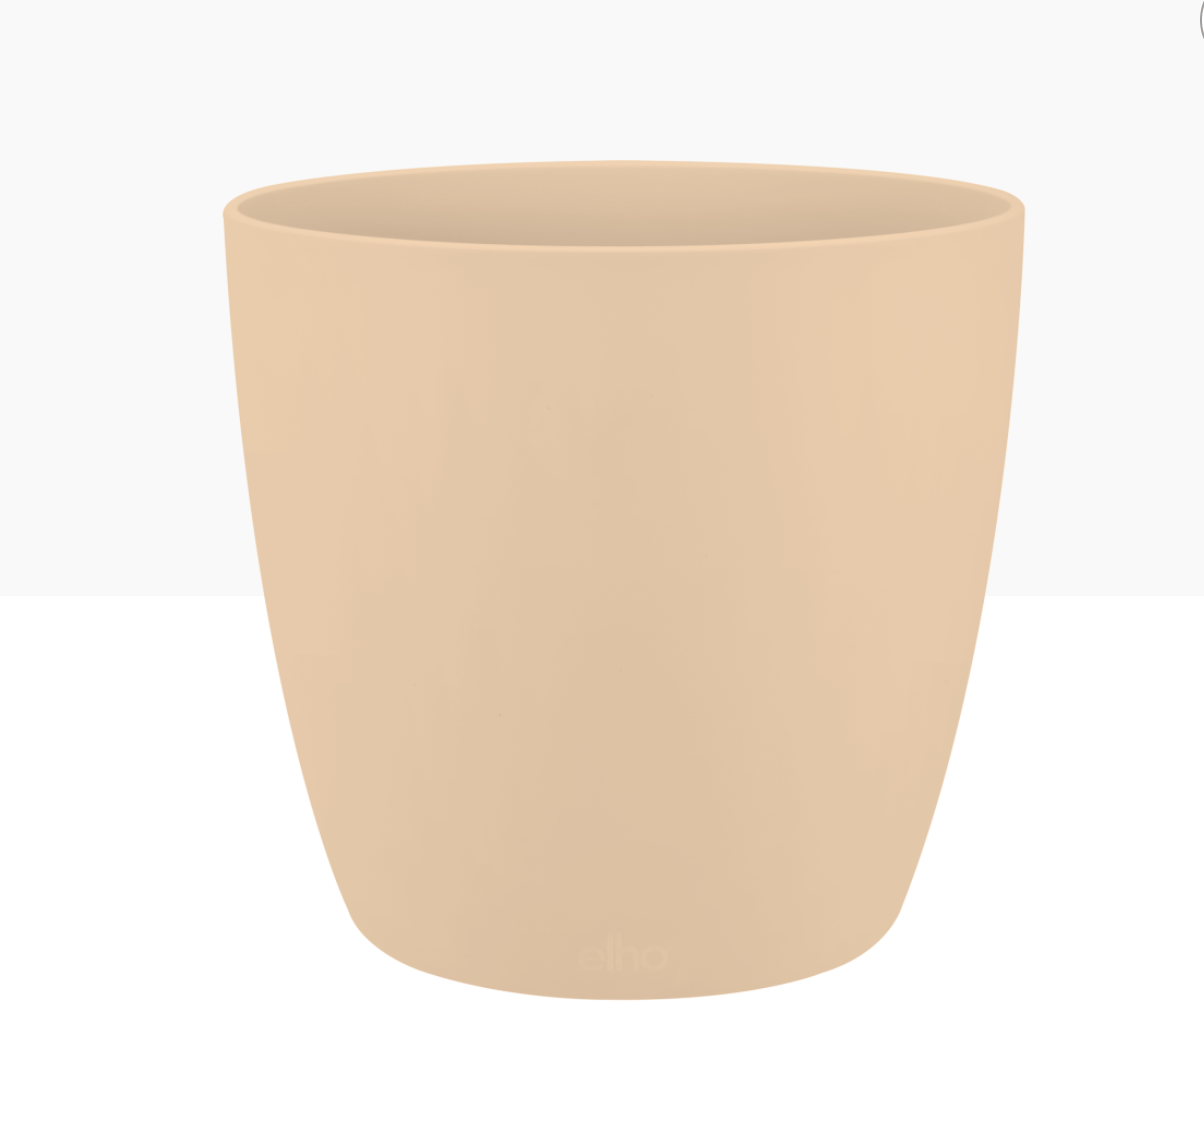 Elho Plant Pot 14cm / Nude Recycled Plastic Plant Pot - 'brussels round' in Nude